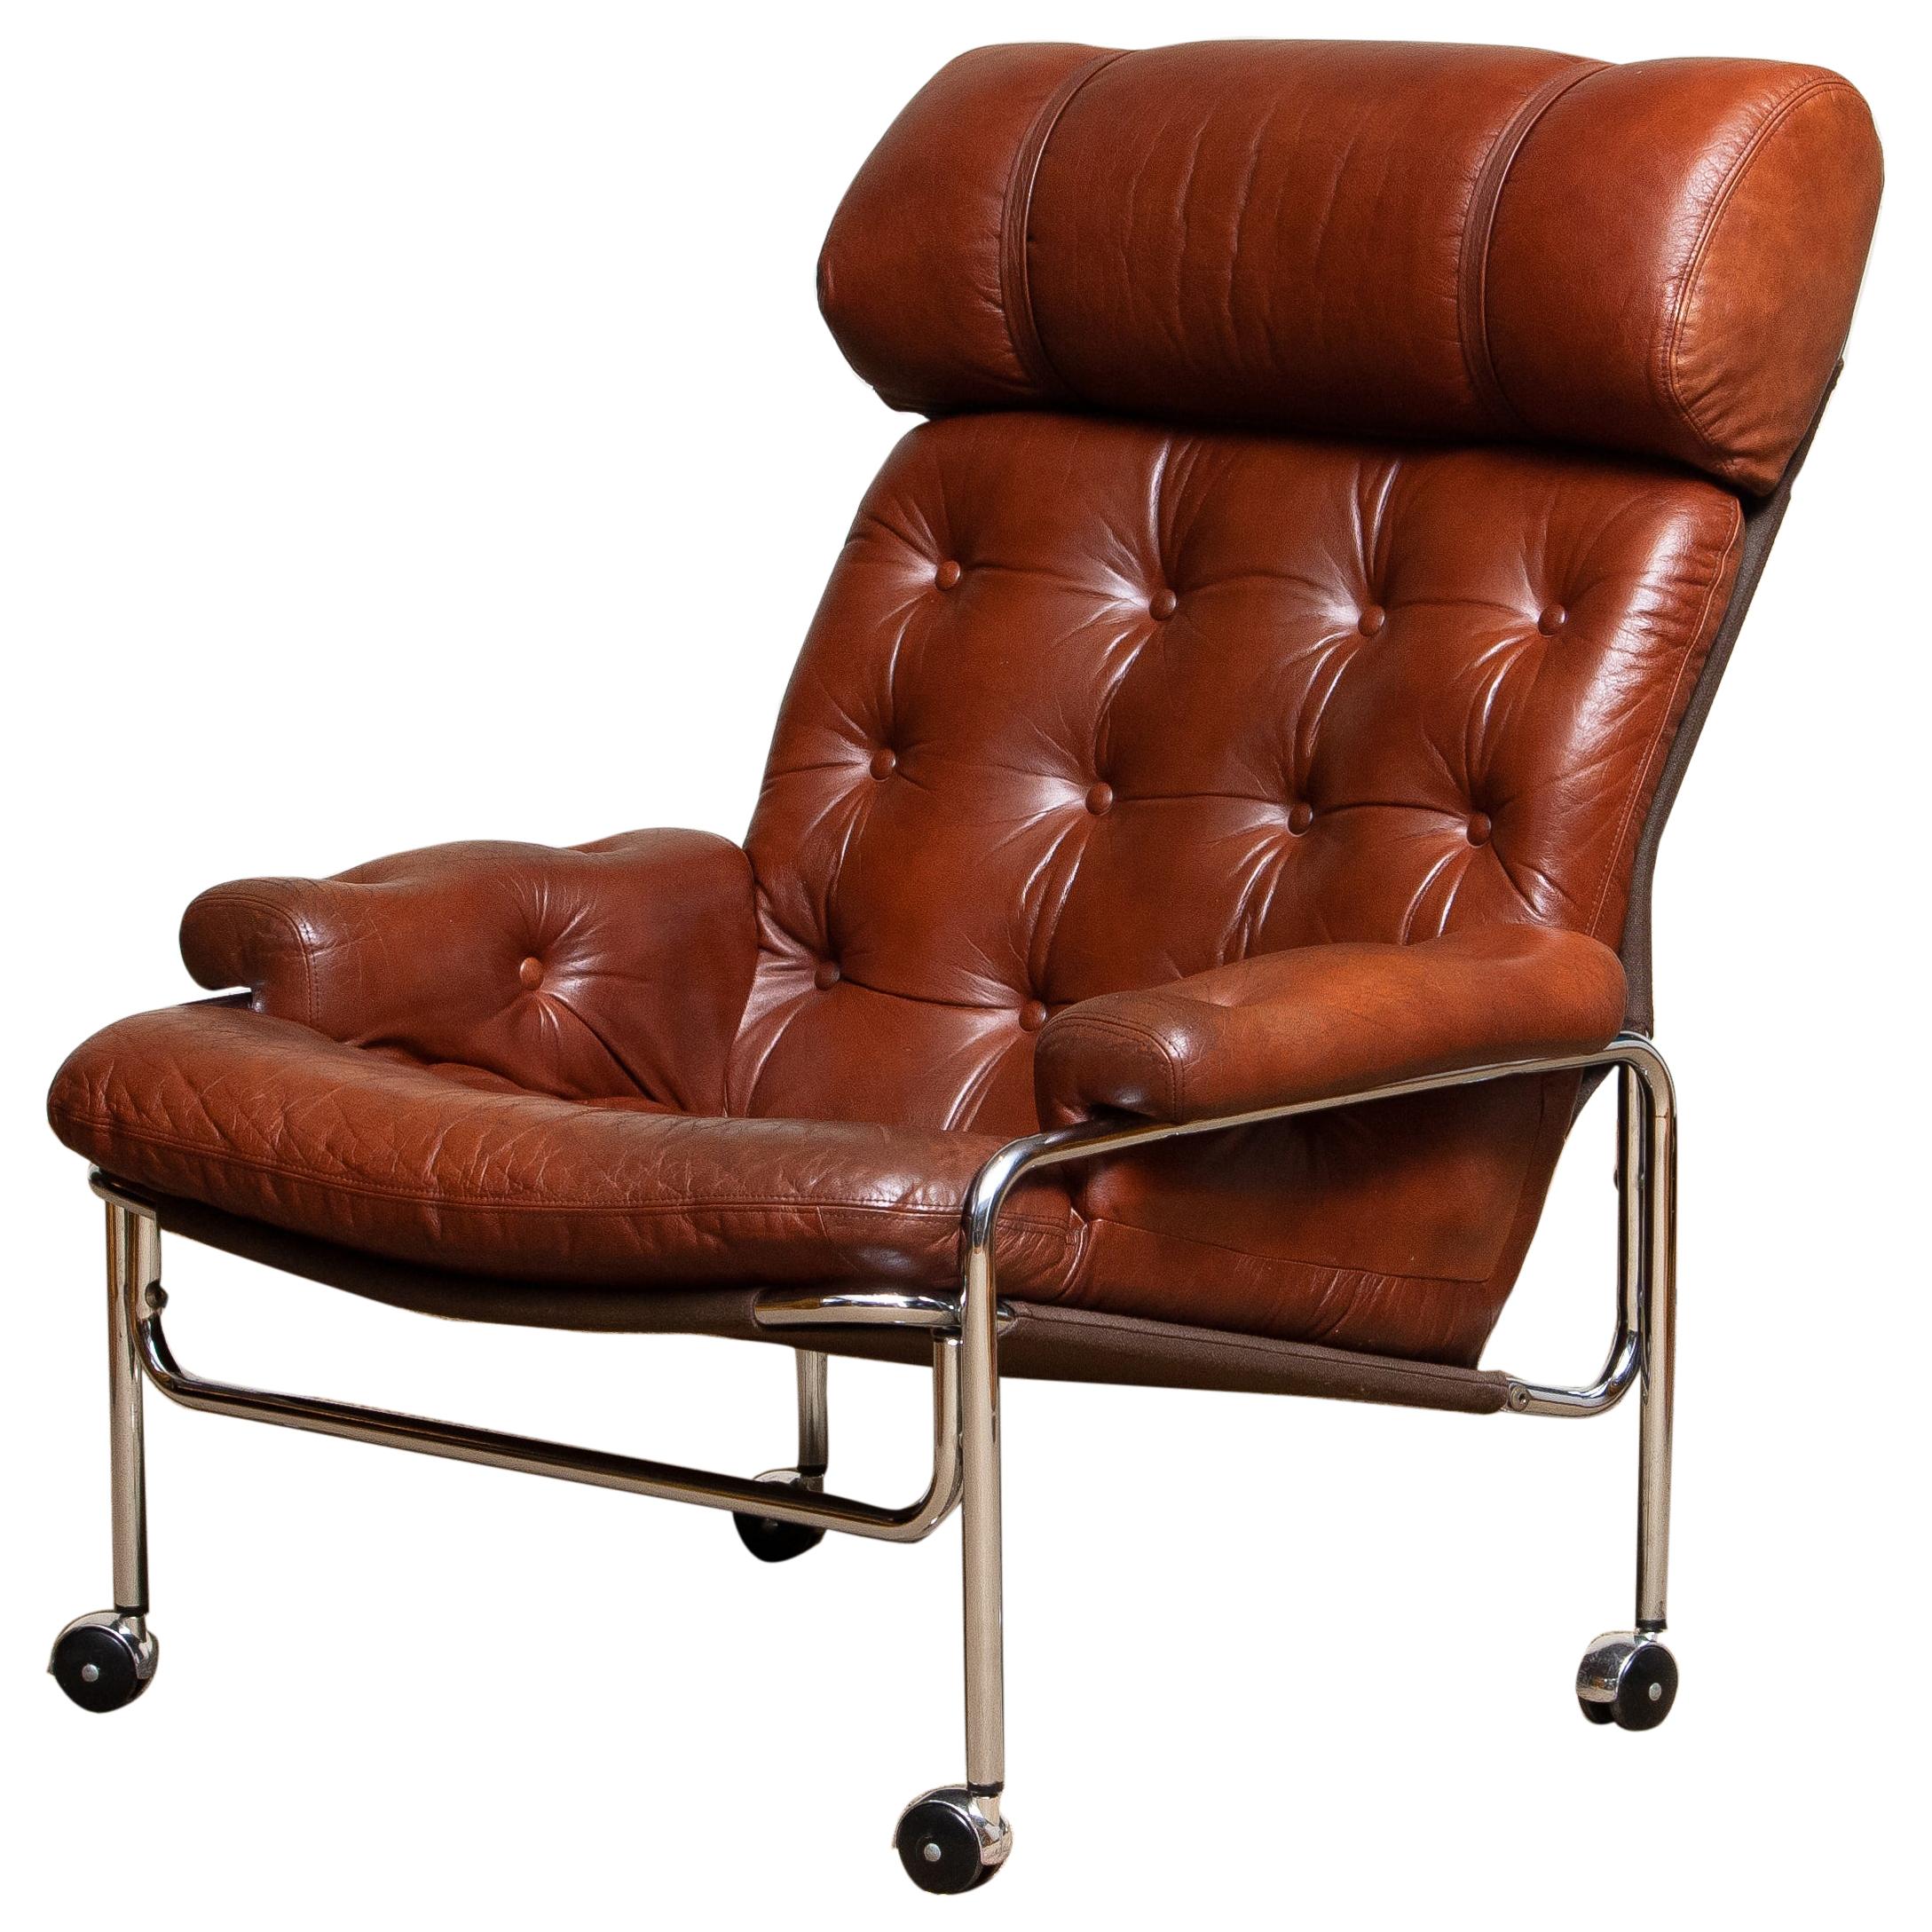 Beautiful lounge / easy chair in aged brown / cognac leather and chrome designed by Pethrus Lindlöfs for A.B. Lindlöfs Möbler Lammhult, Sweden.
The aged leather on the chairs gives the chairs the typical vintage character. The leather is soft and